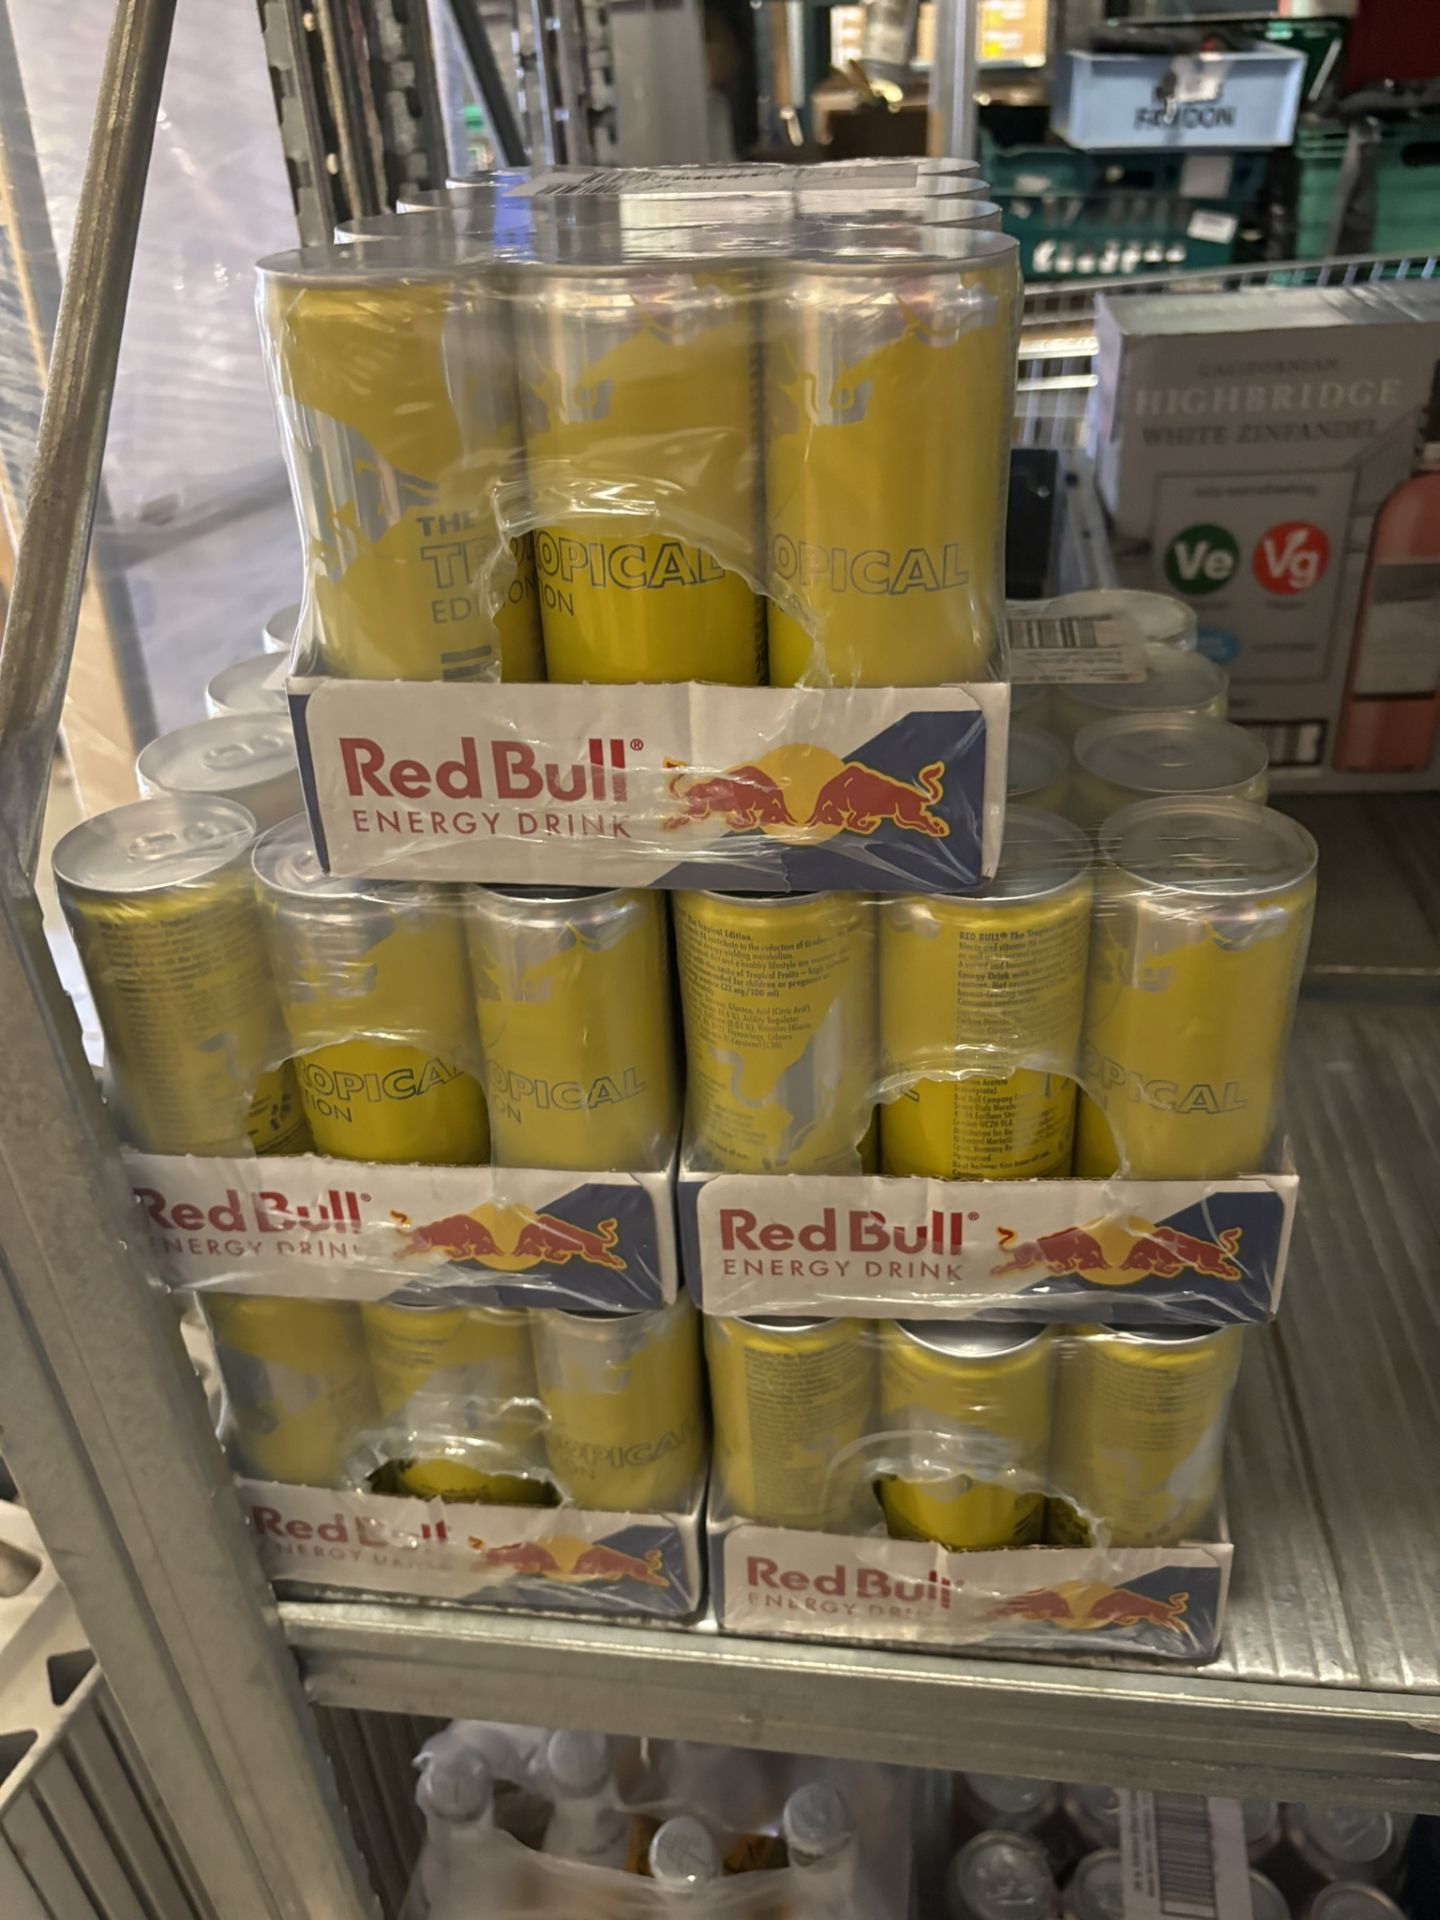 60 X Cans Of Red Bull 'The Tropical Edition' Tropical Fruits Energy Drinks, 250Ml - Image 4 of 5